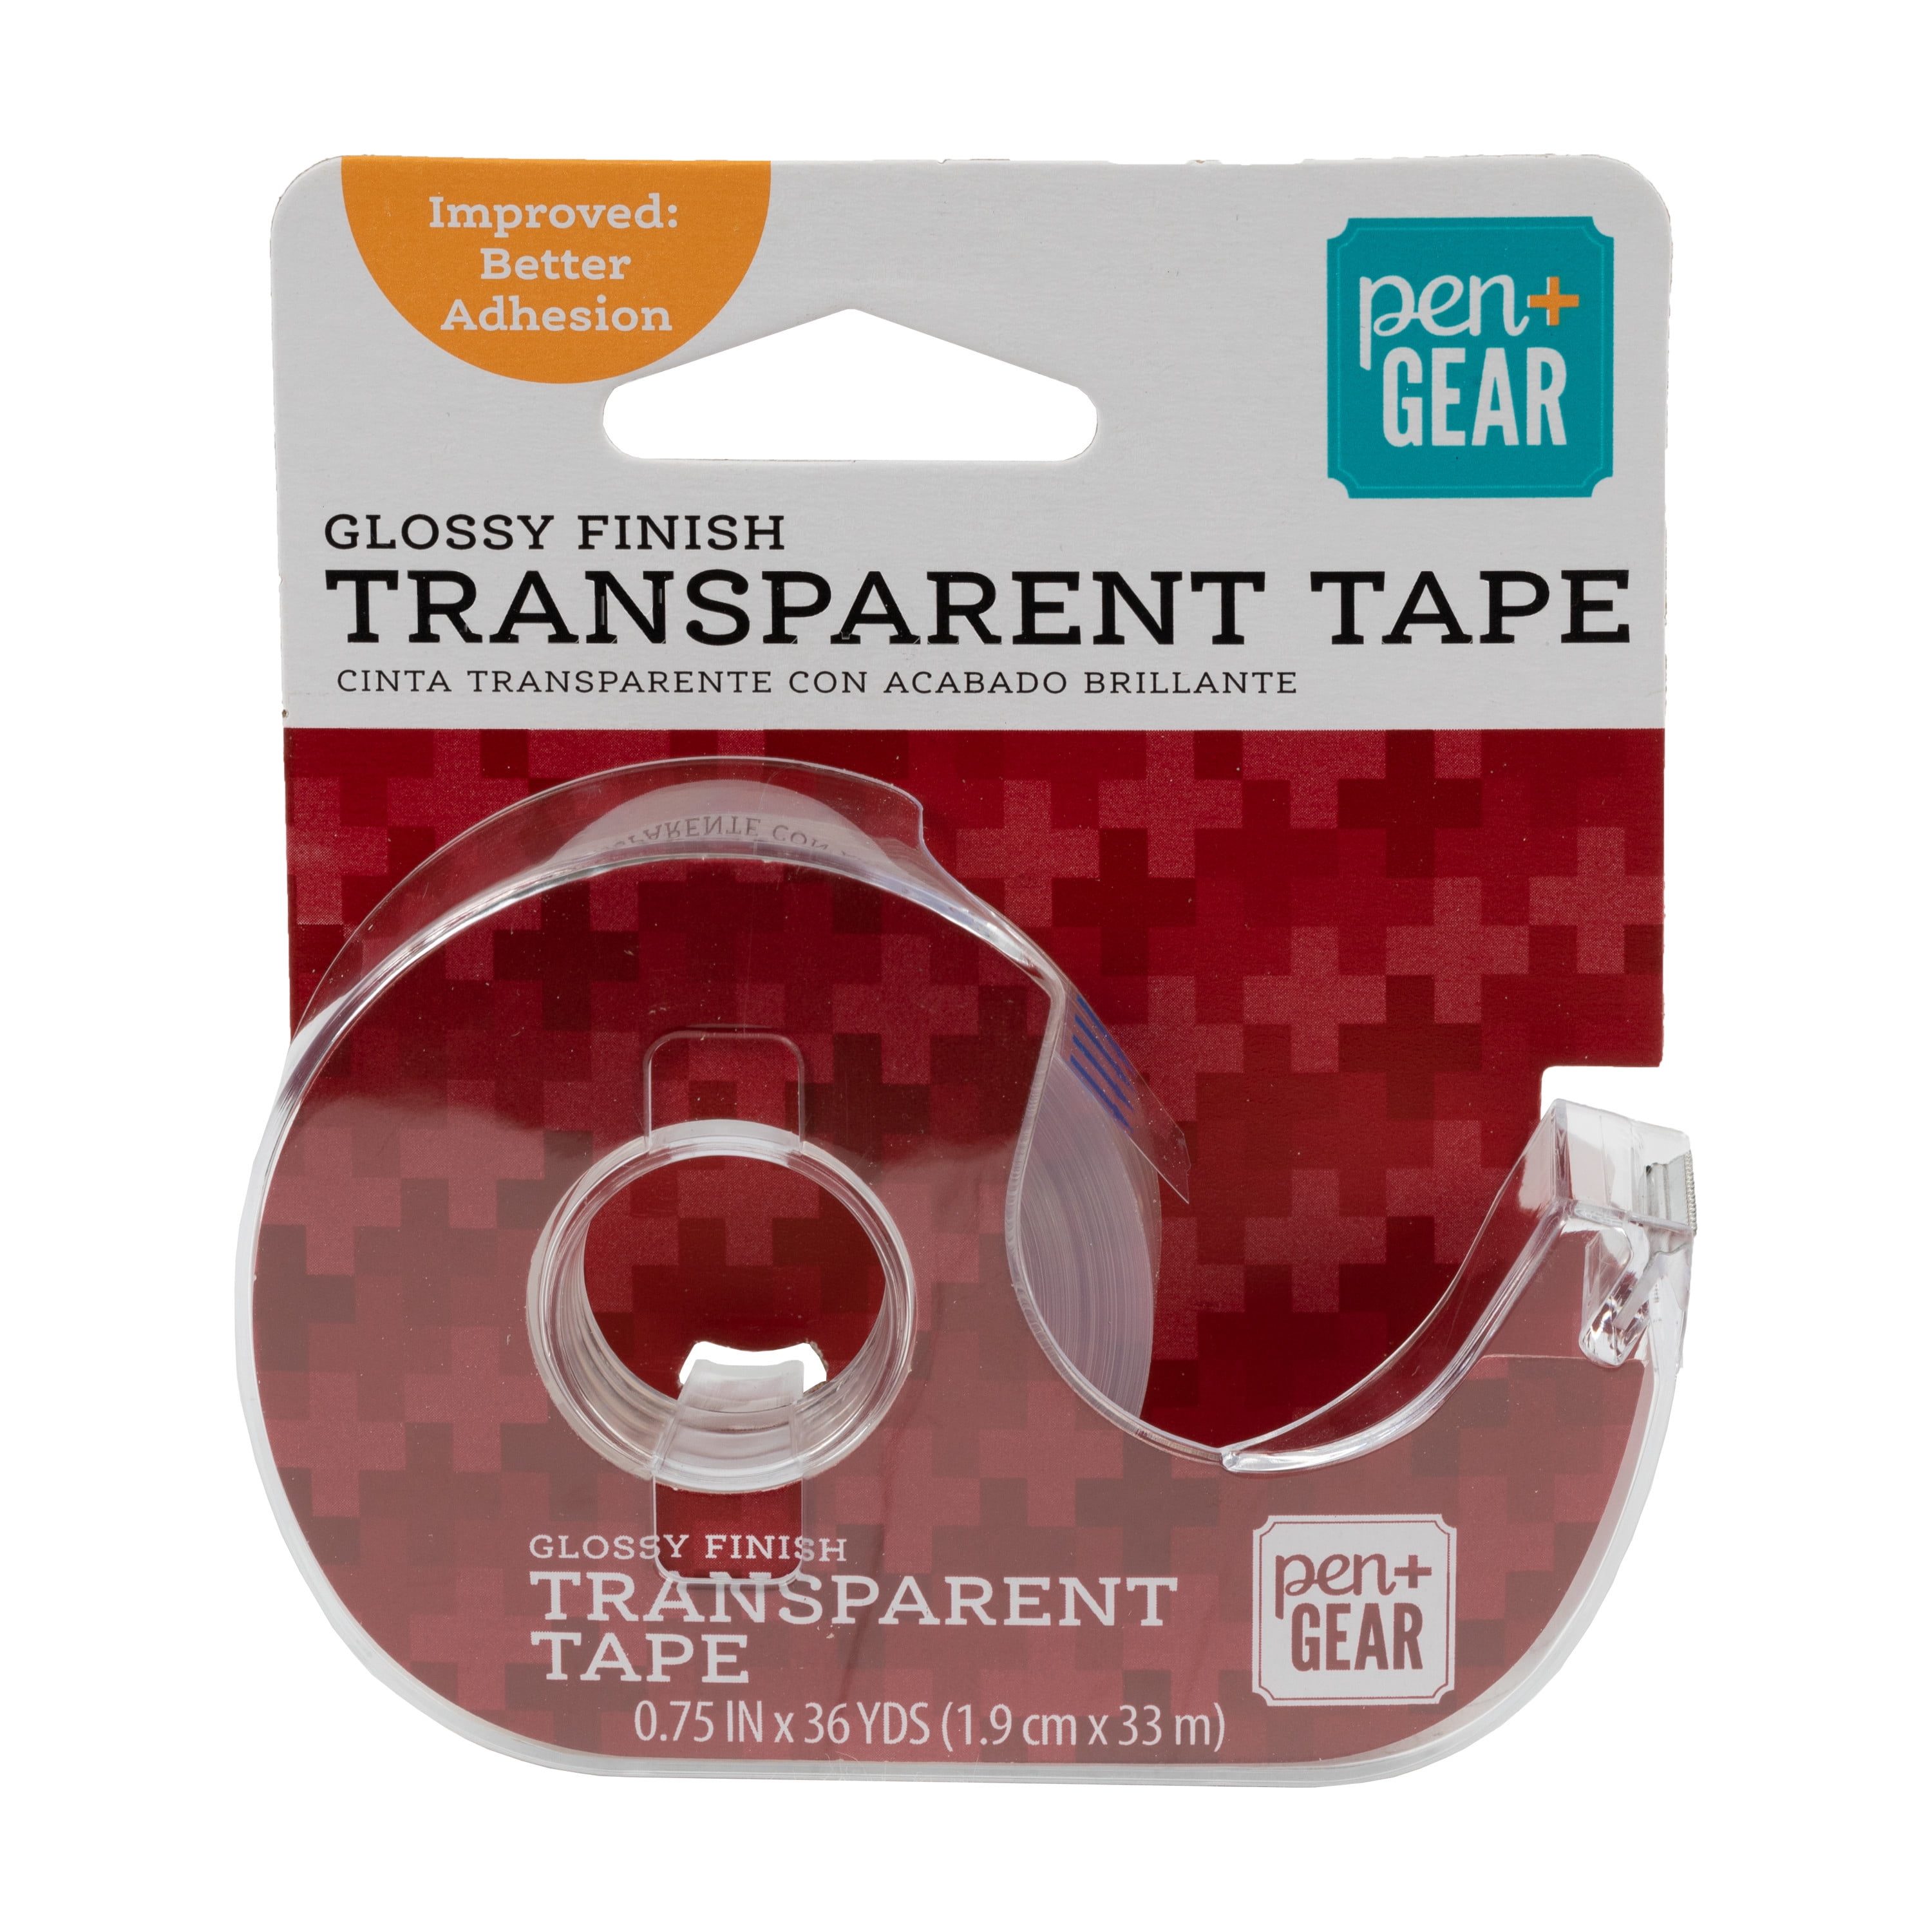 Pen + Gear Transparent Stationery Tape, .75 in. x 36 yd., Glossy Finish